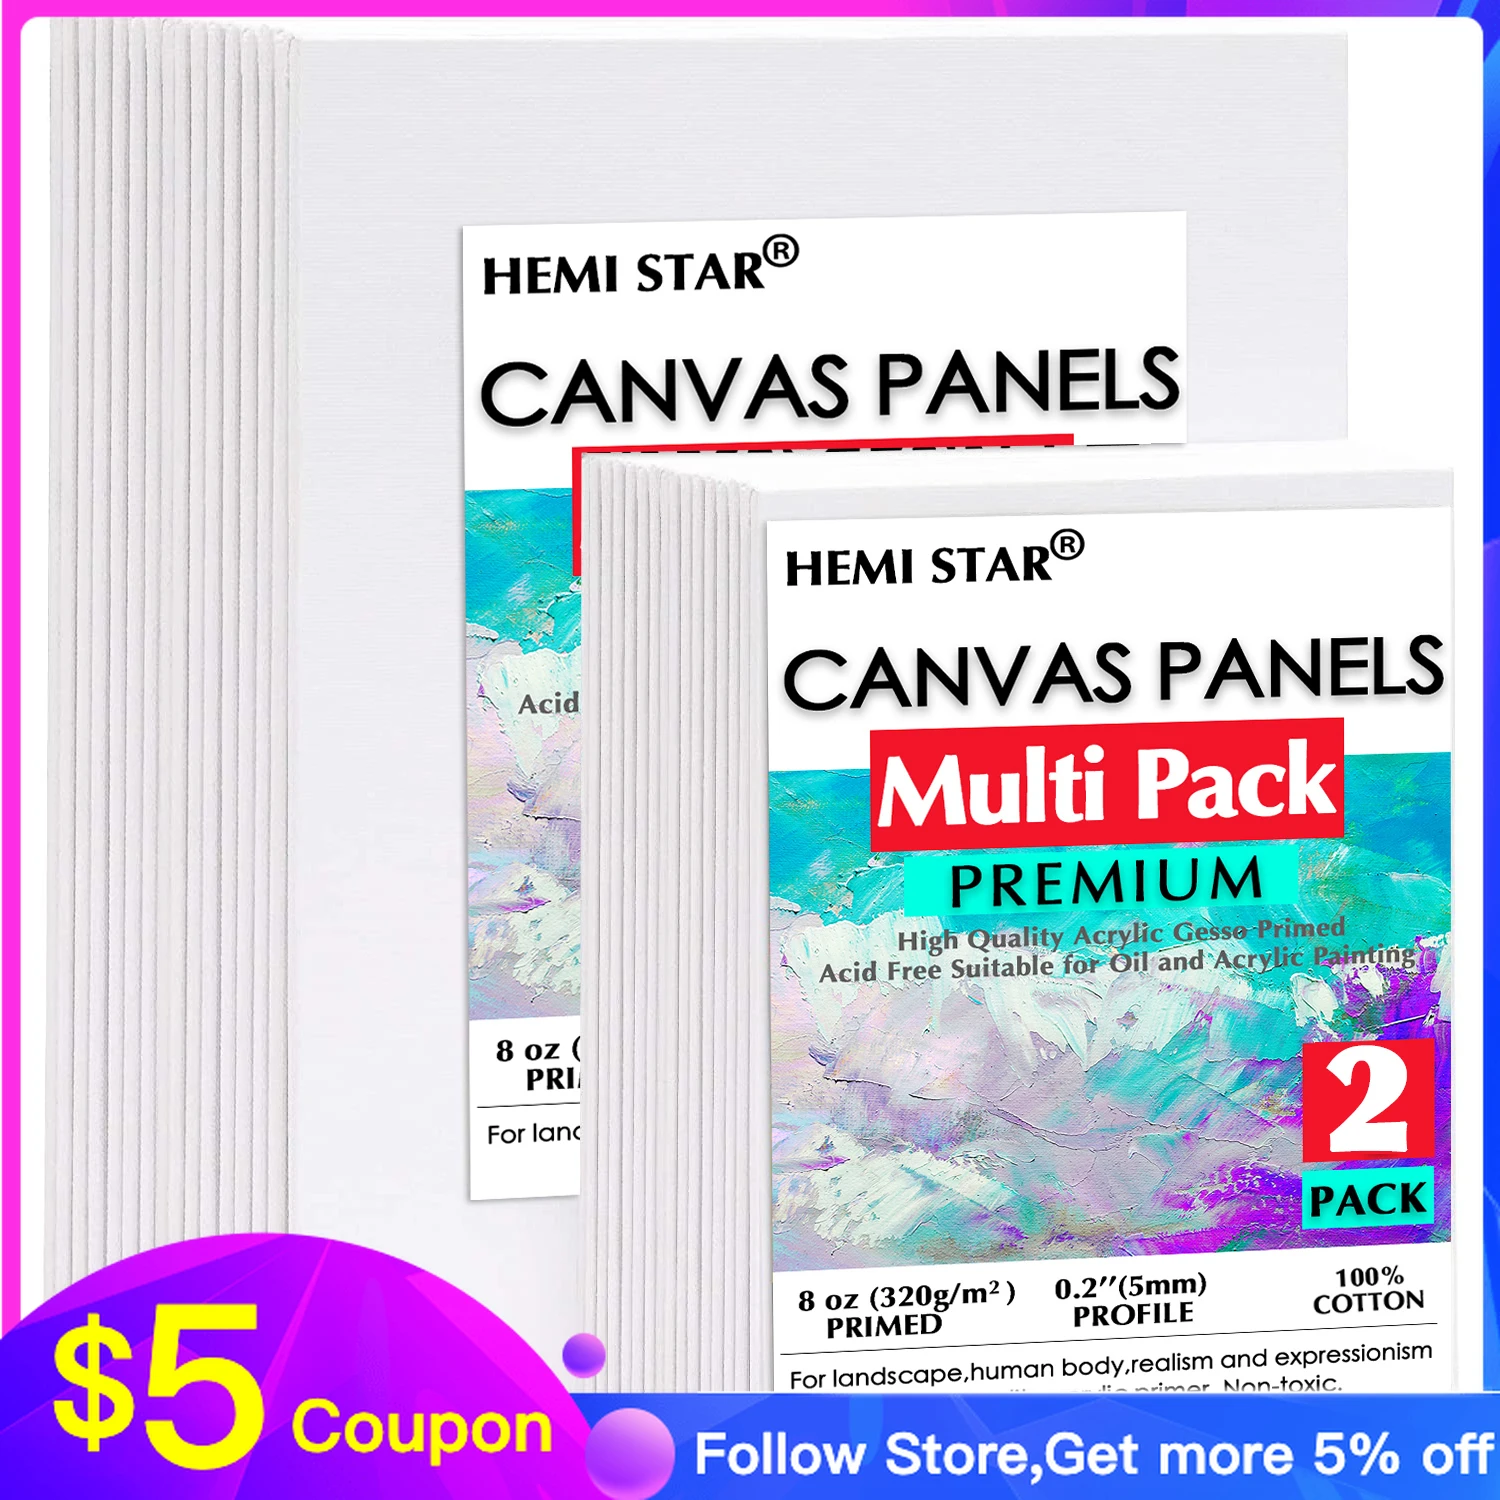  Round Canvas, 8 Pack Circle Canvases for Painting, Pre  Stretched Round Canvases, Circle Art Canvases Panels for Acrylic Painting,  Pouring, Oil Paint - Included 4pcs 12x12'', 4pcs 8x8'' Round Canvases